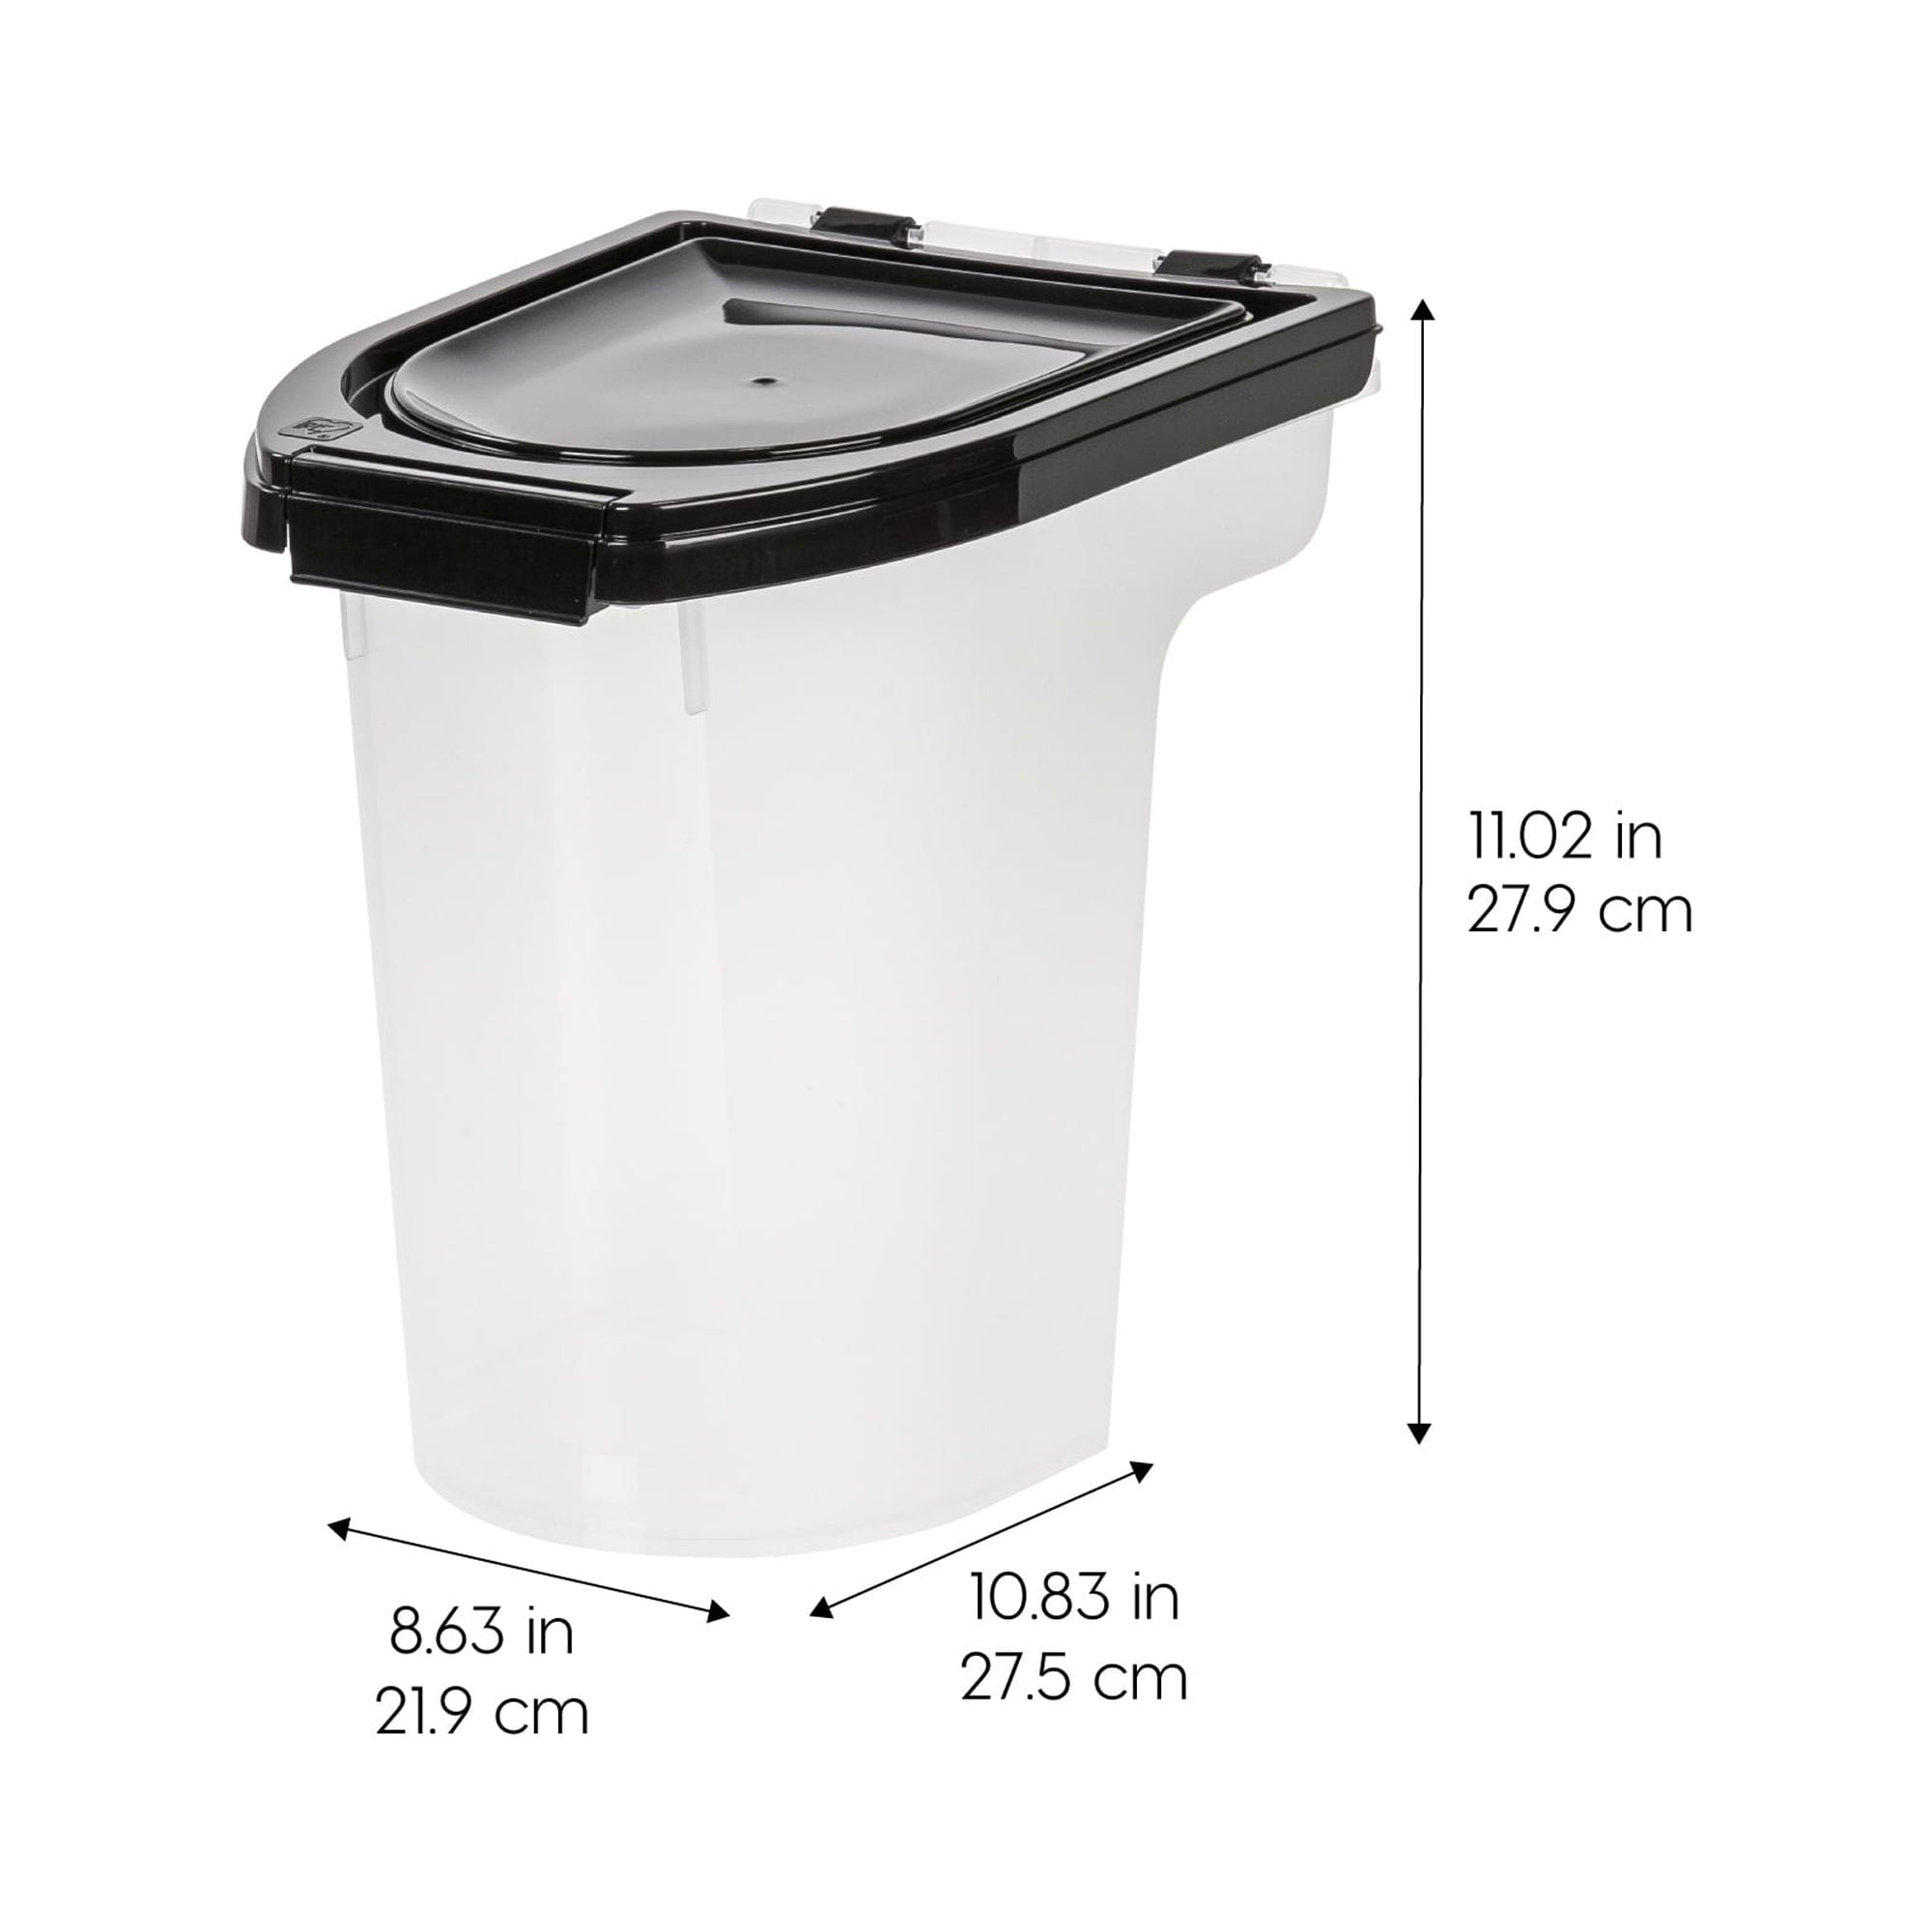 FRISCO Airtight Food Storage Container, Clear/Black, 12.75-qt